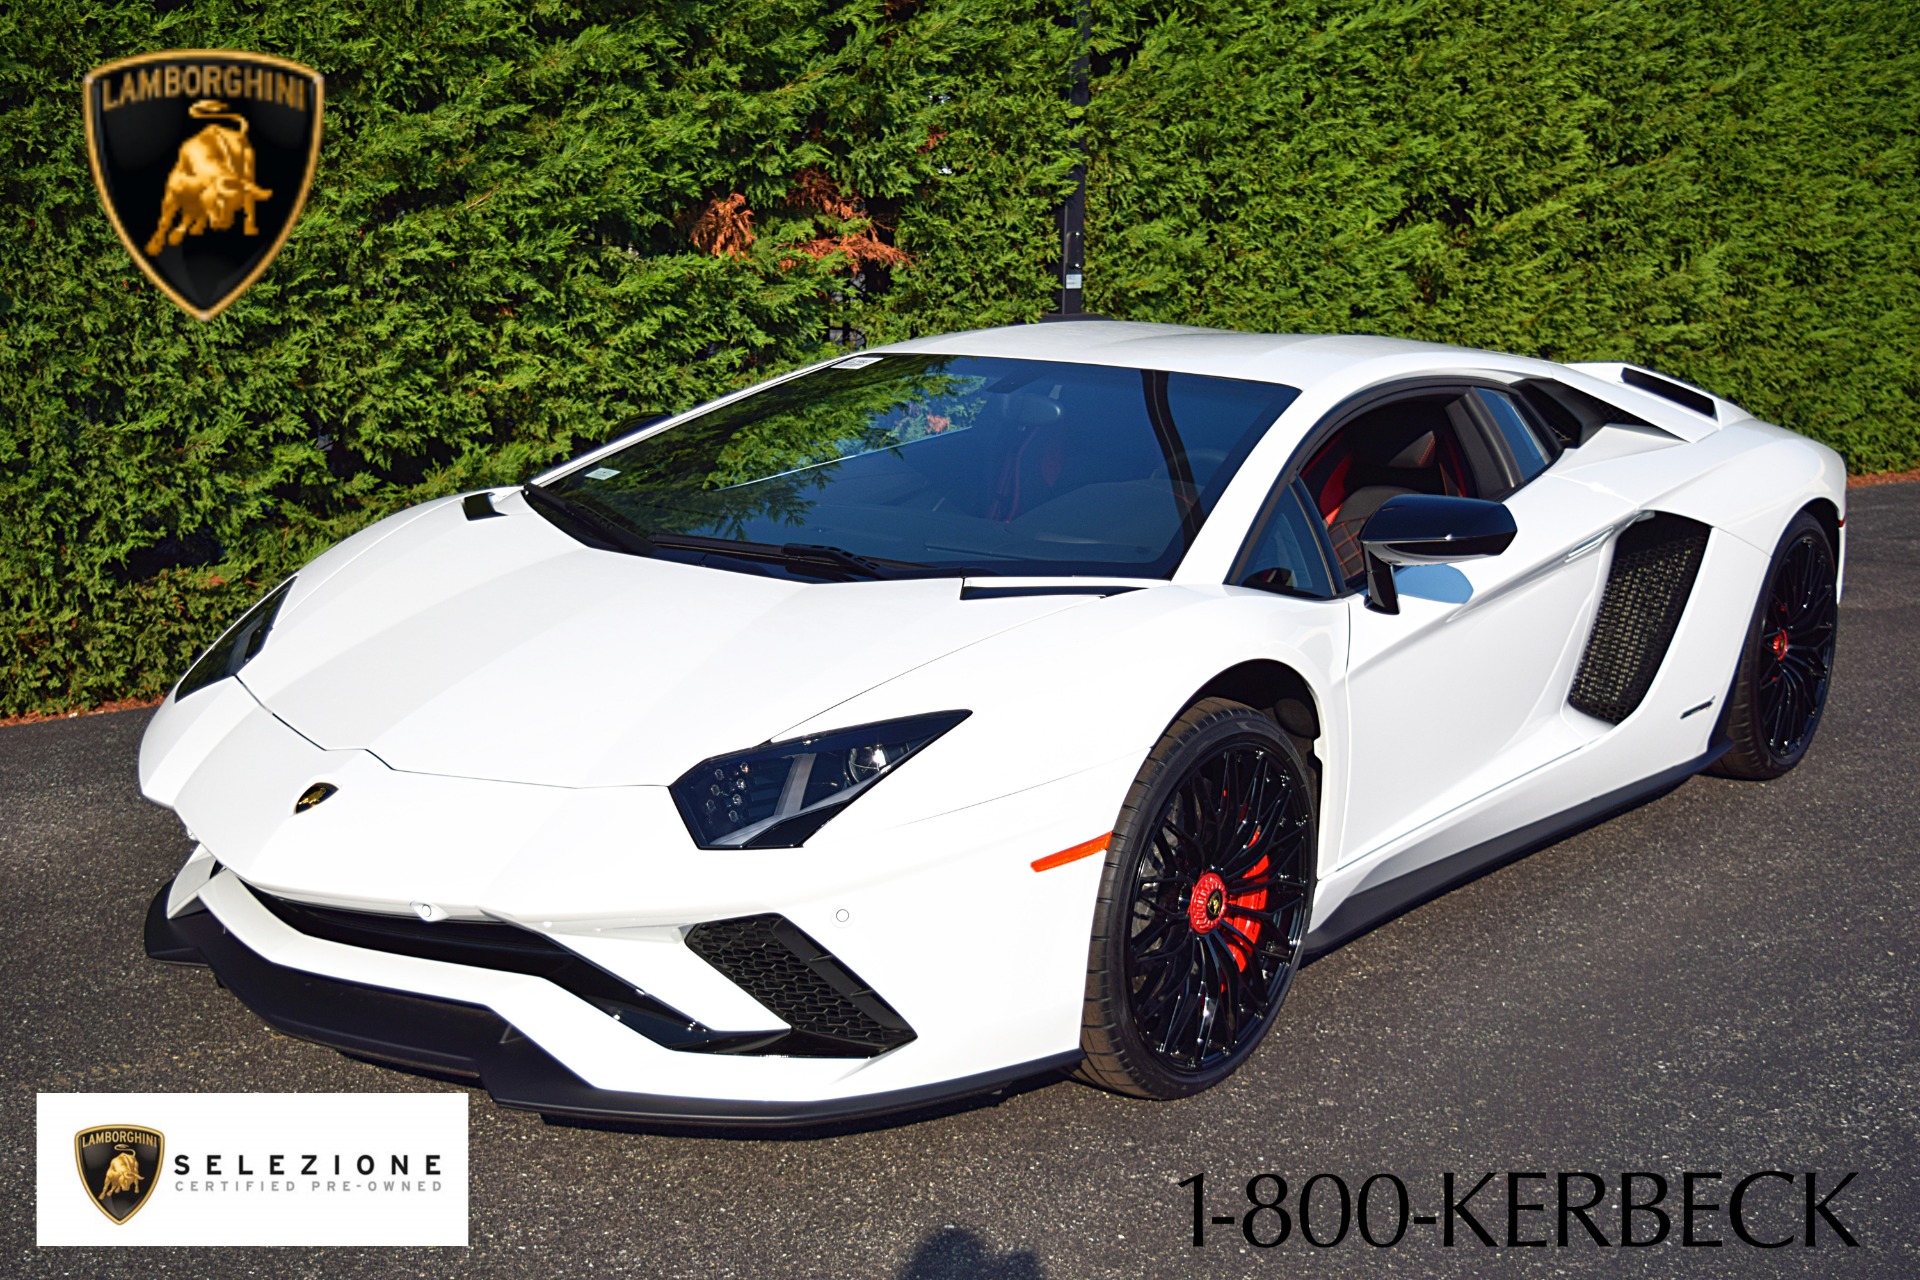 Used 2018 Lamborghini Aventador S / LEASE OPTIONS AVAILABLE for sale Sold at Bentley Palmyra N.J. in Palmyra NJ 08065 2